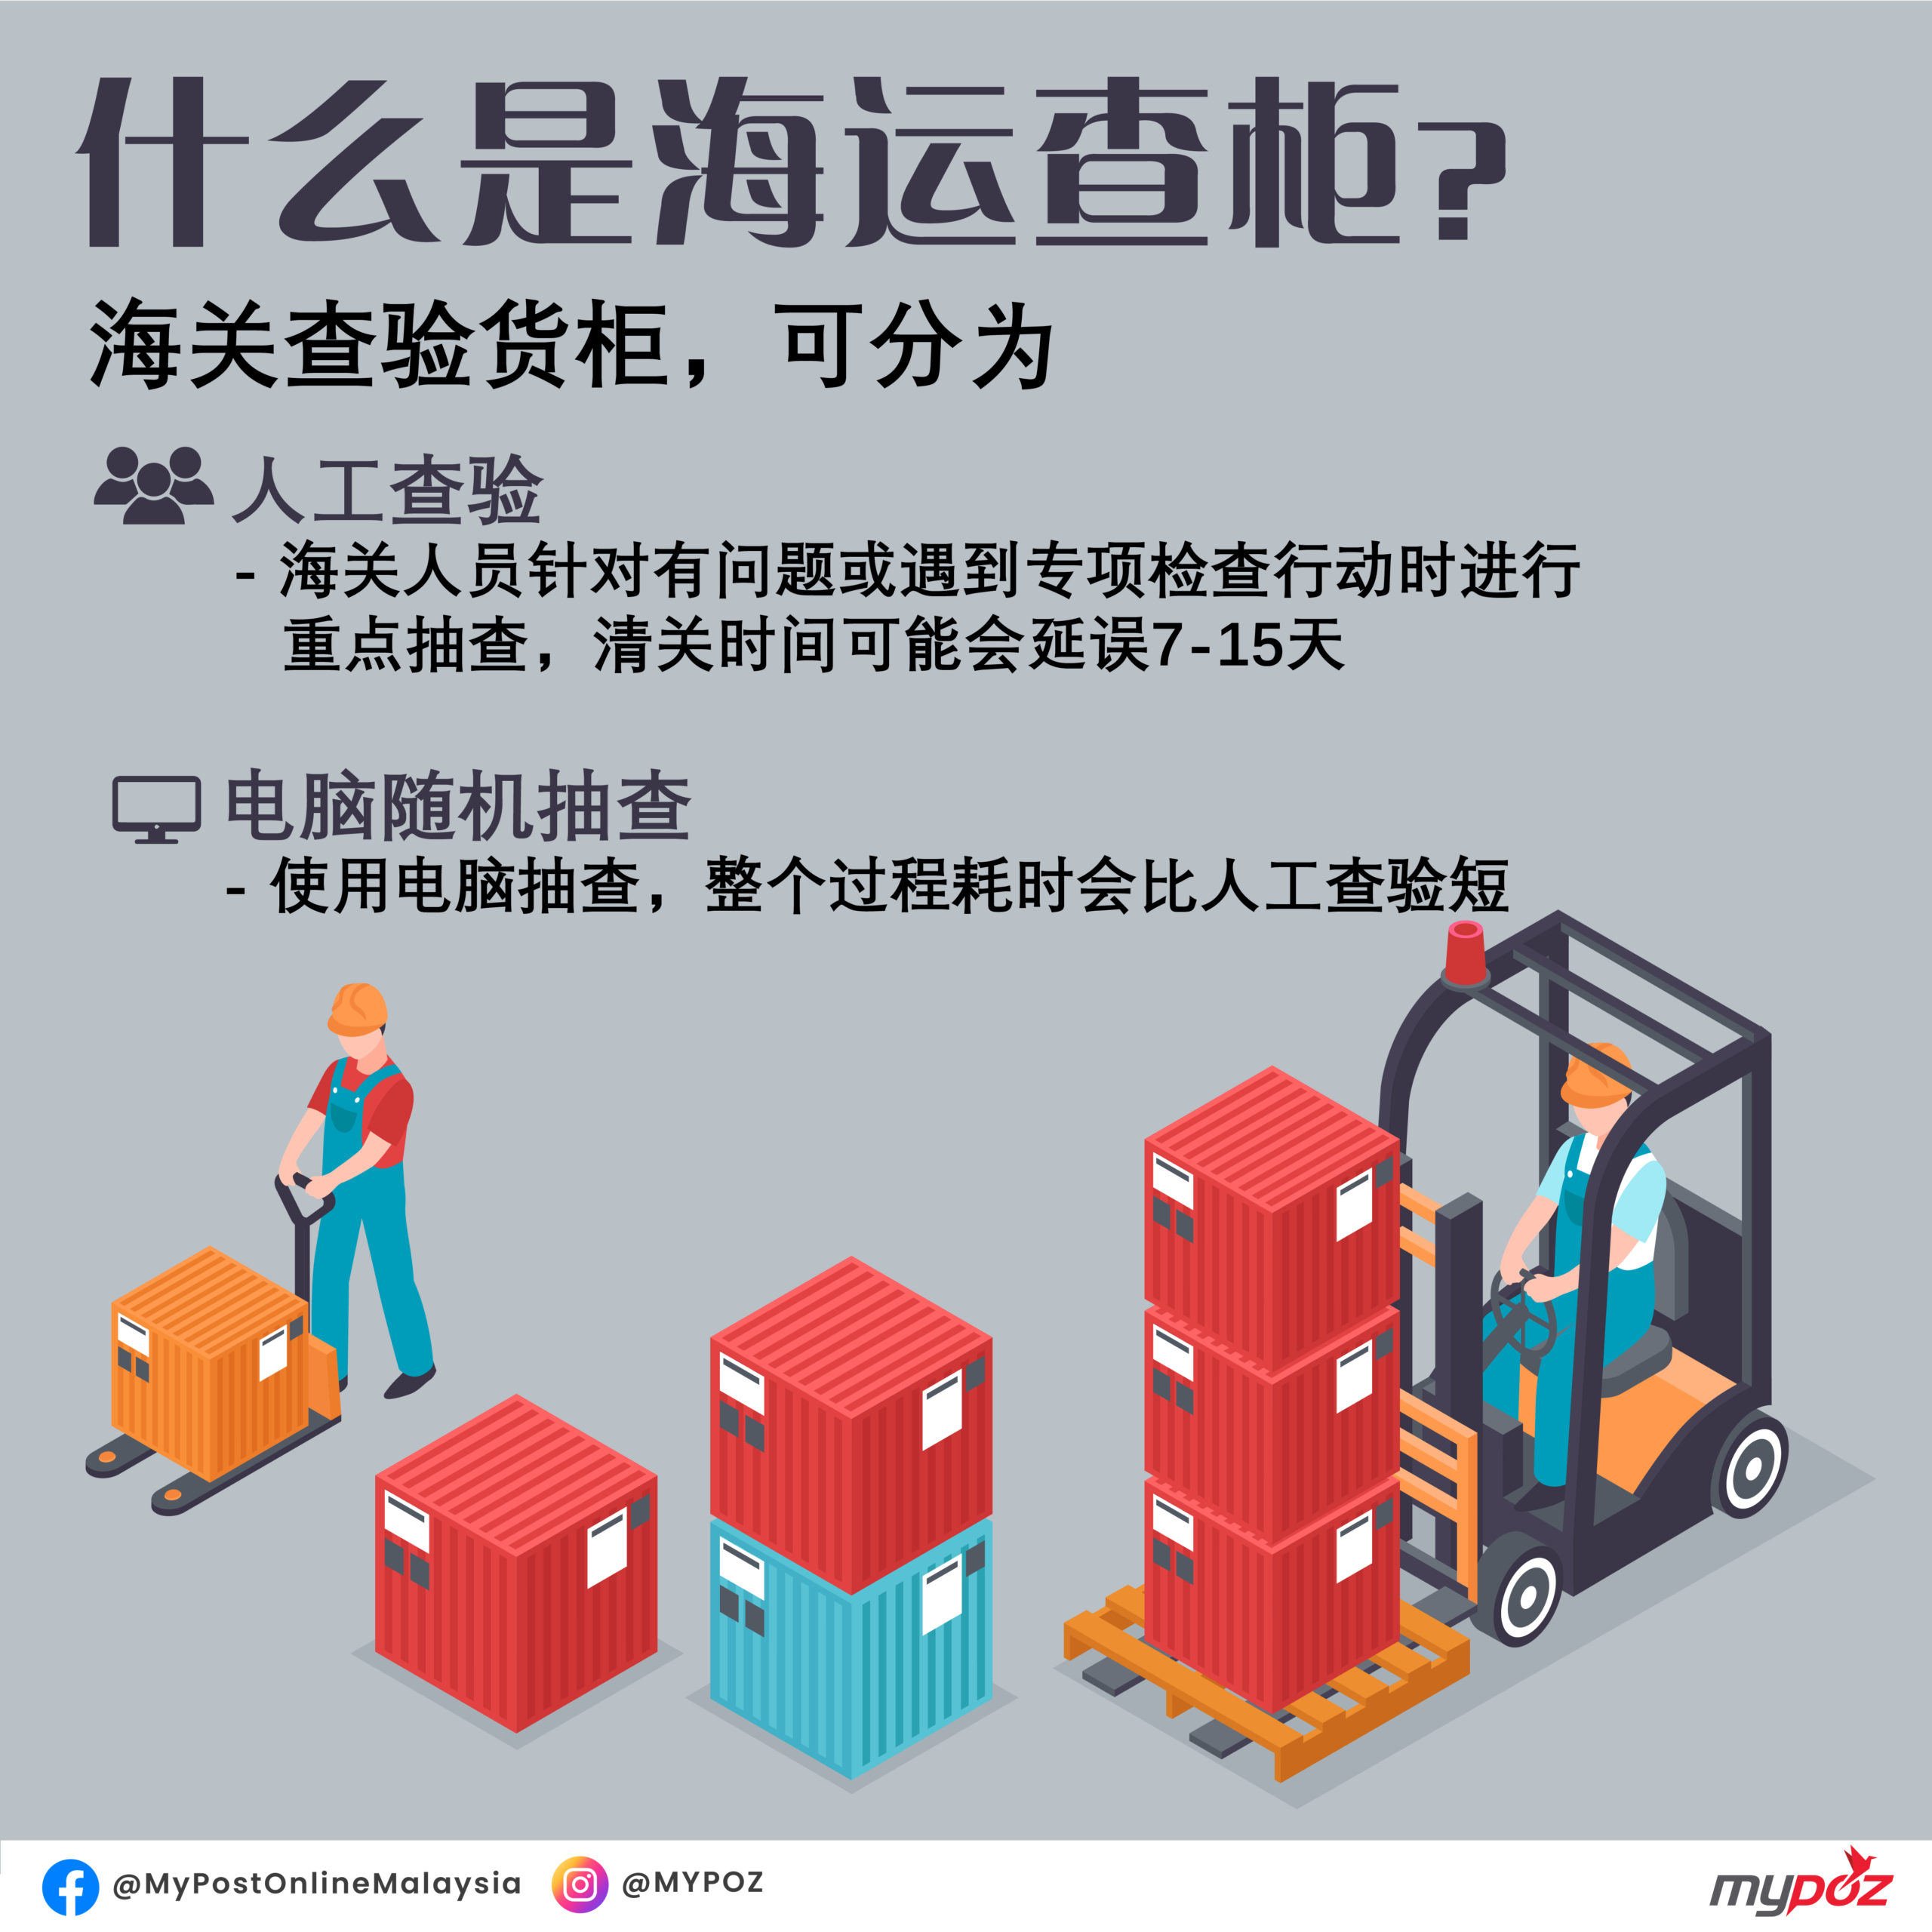 HOW TO CALCULATE THE FEE - MYPOZ 全球进货弹指间.安心托付快乐收